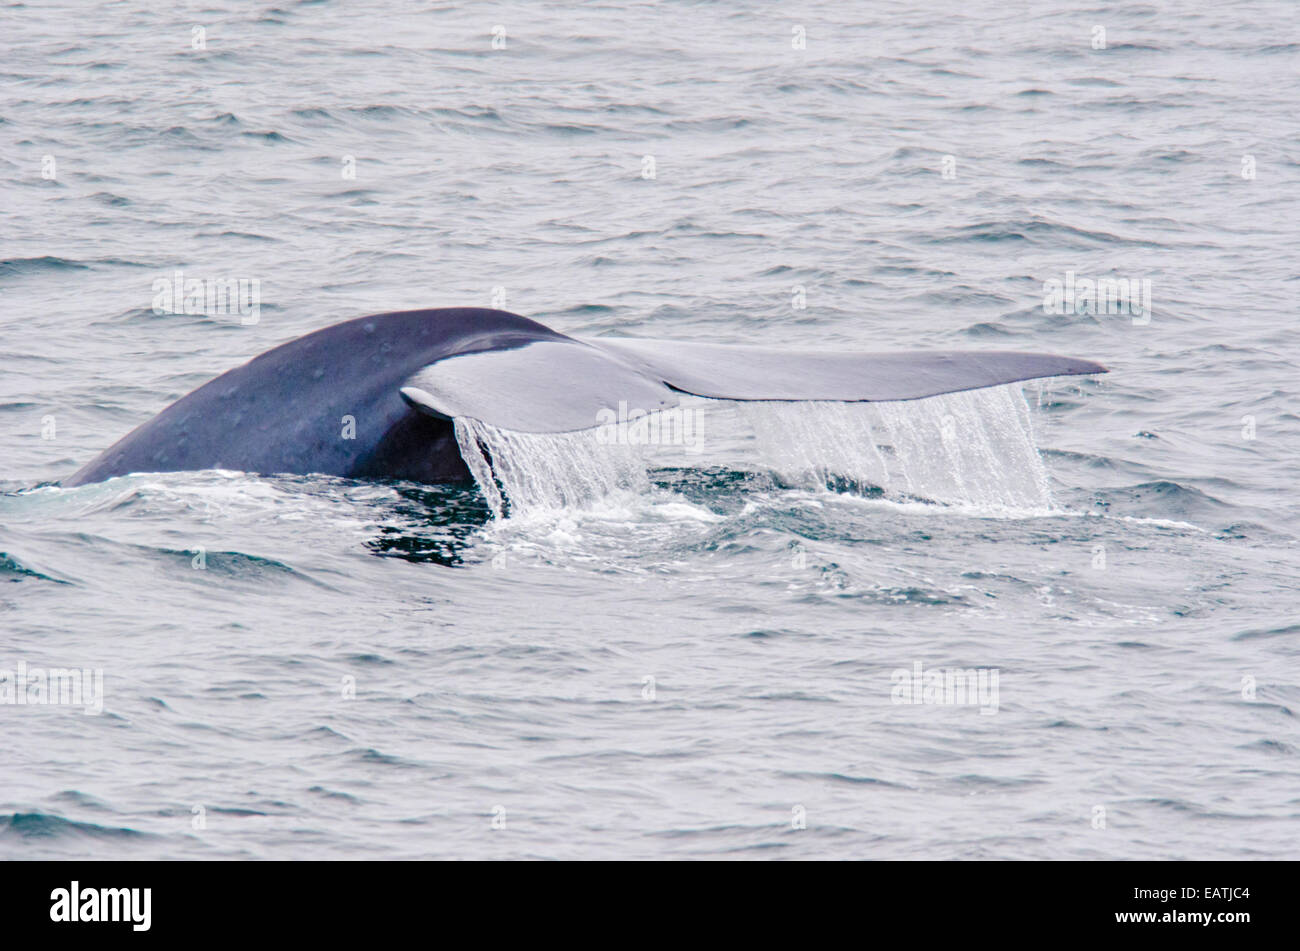 An endangered blue whale, Balaenoptera musculus powerful fluke diving. Stock Photo